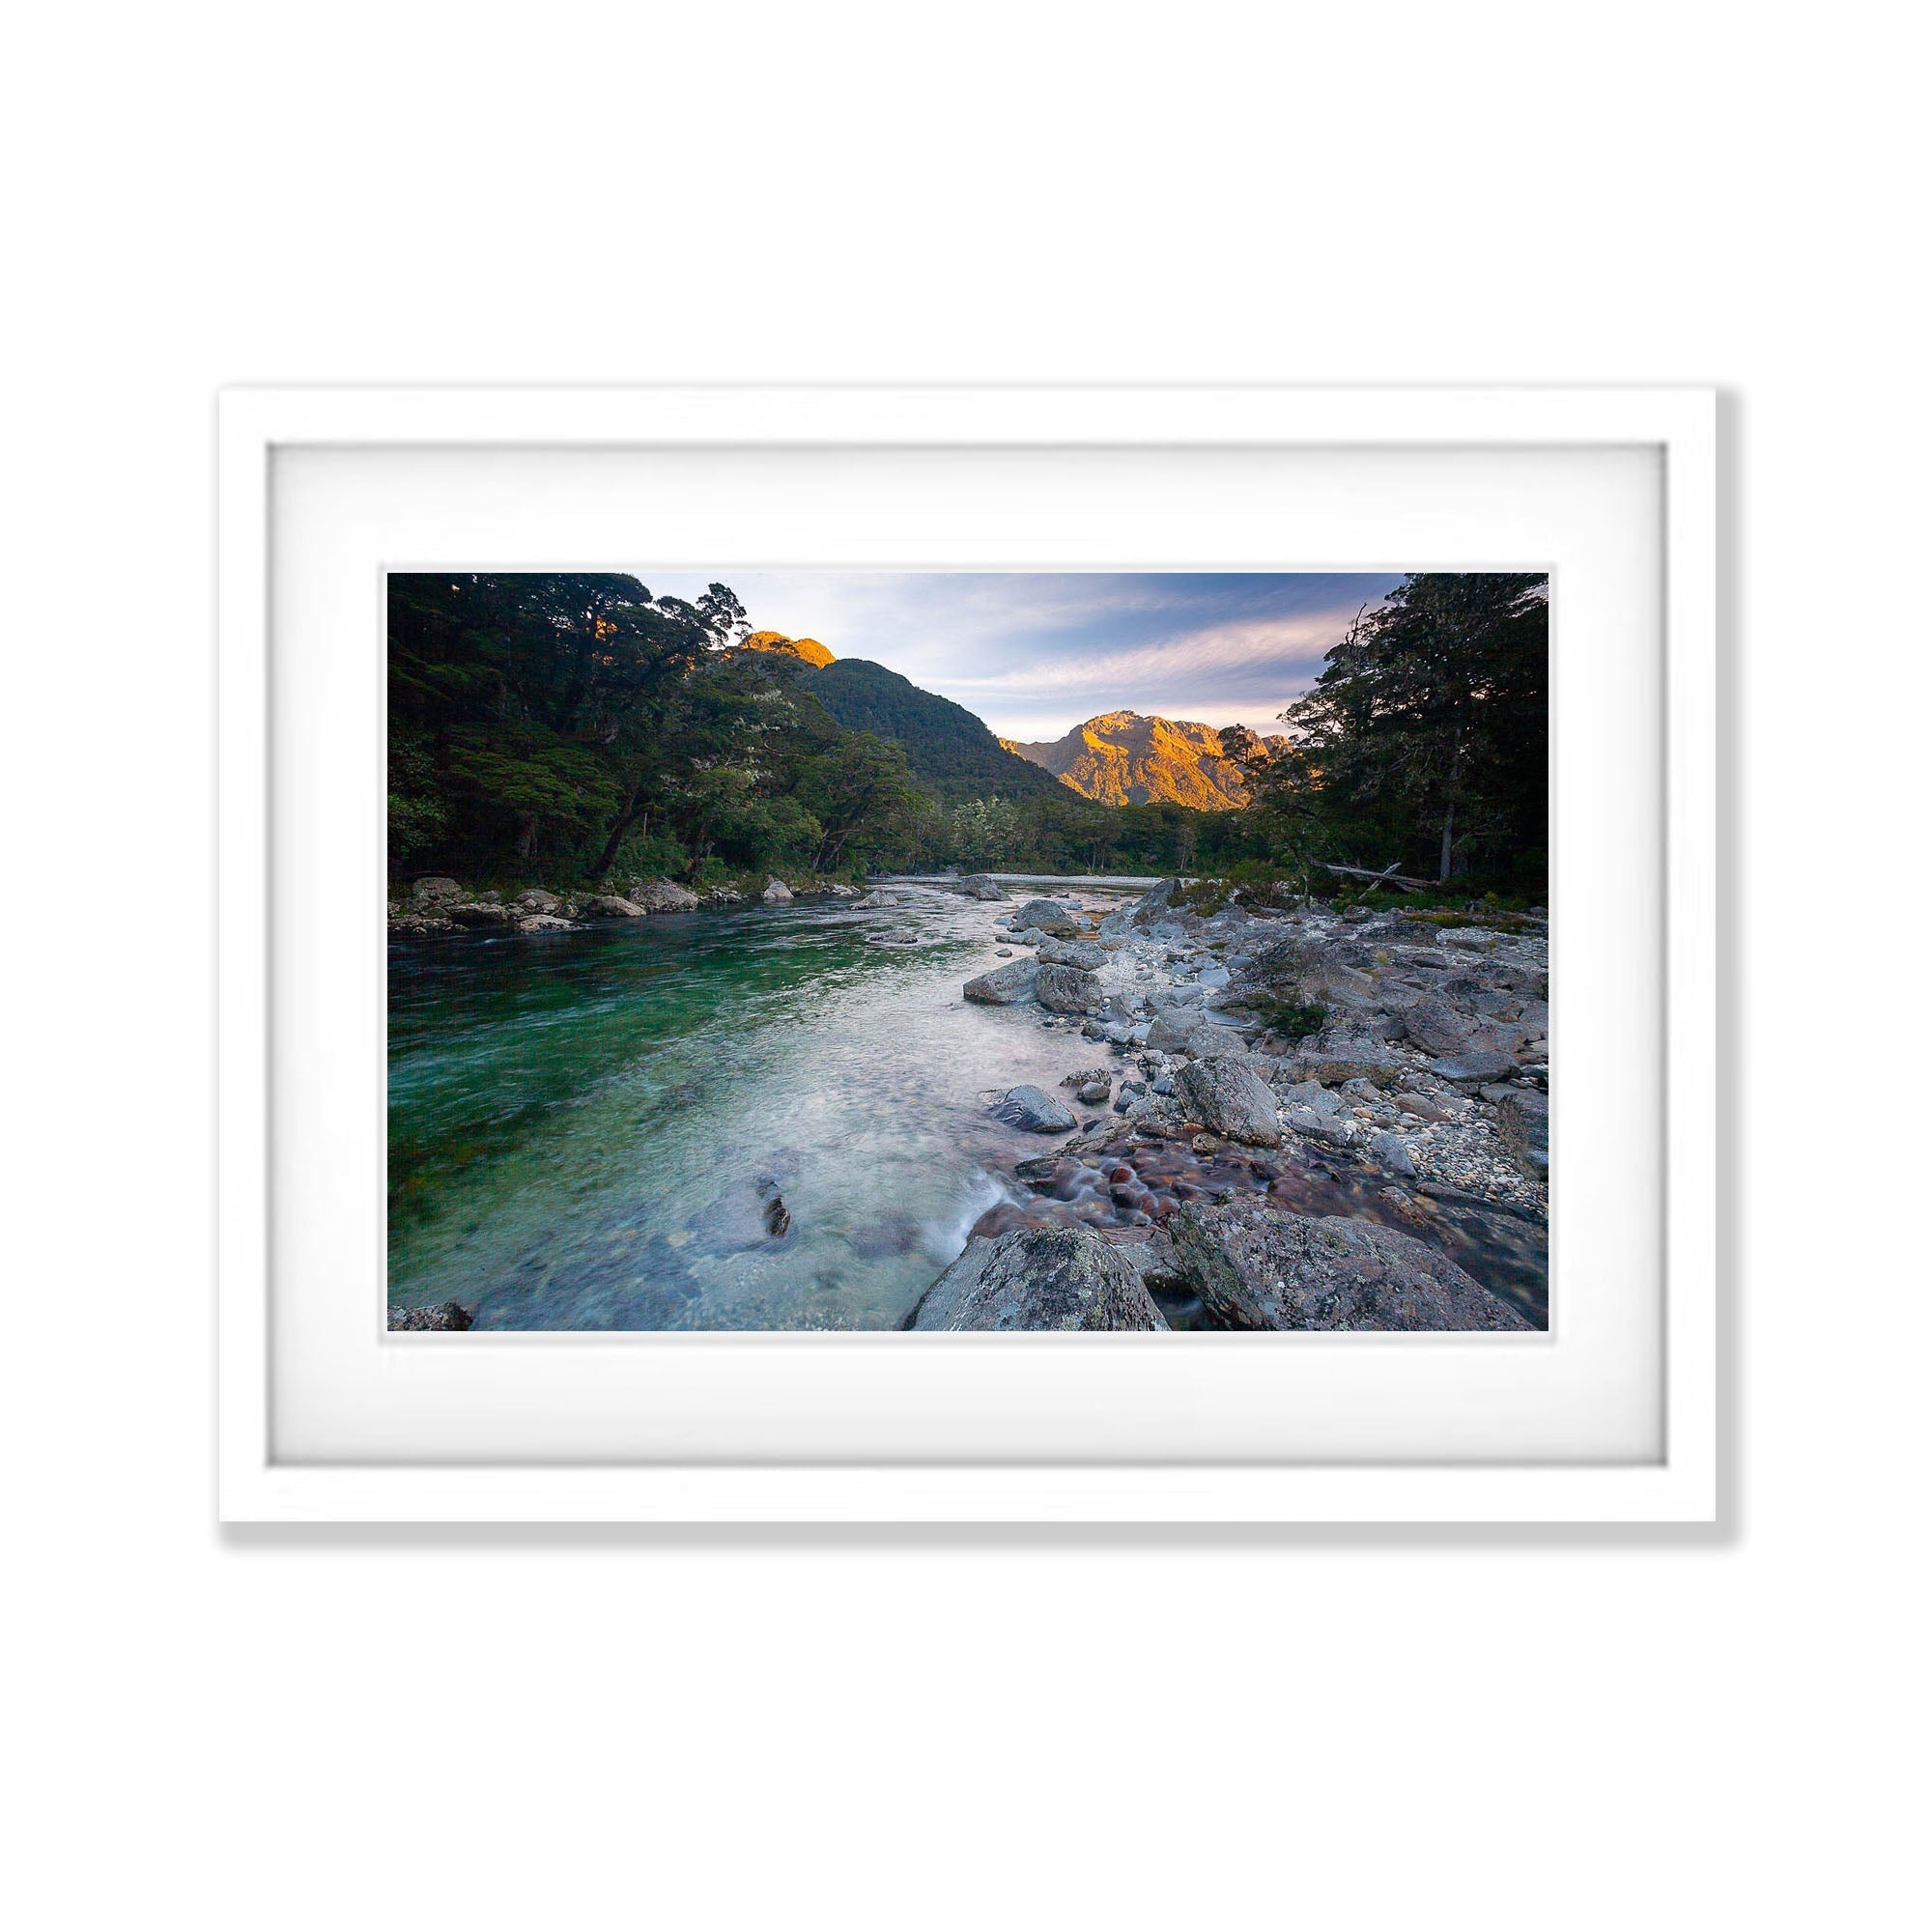 The Clinton River and Earl Mountains at sunset, Milford Track - New Zealand